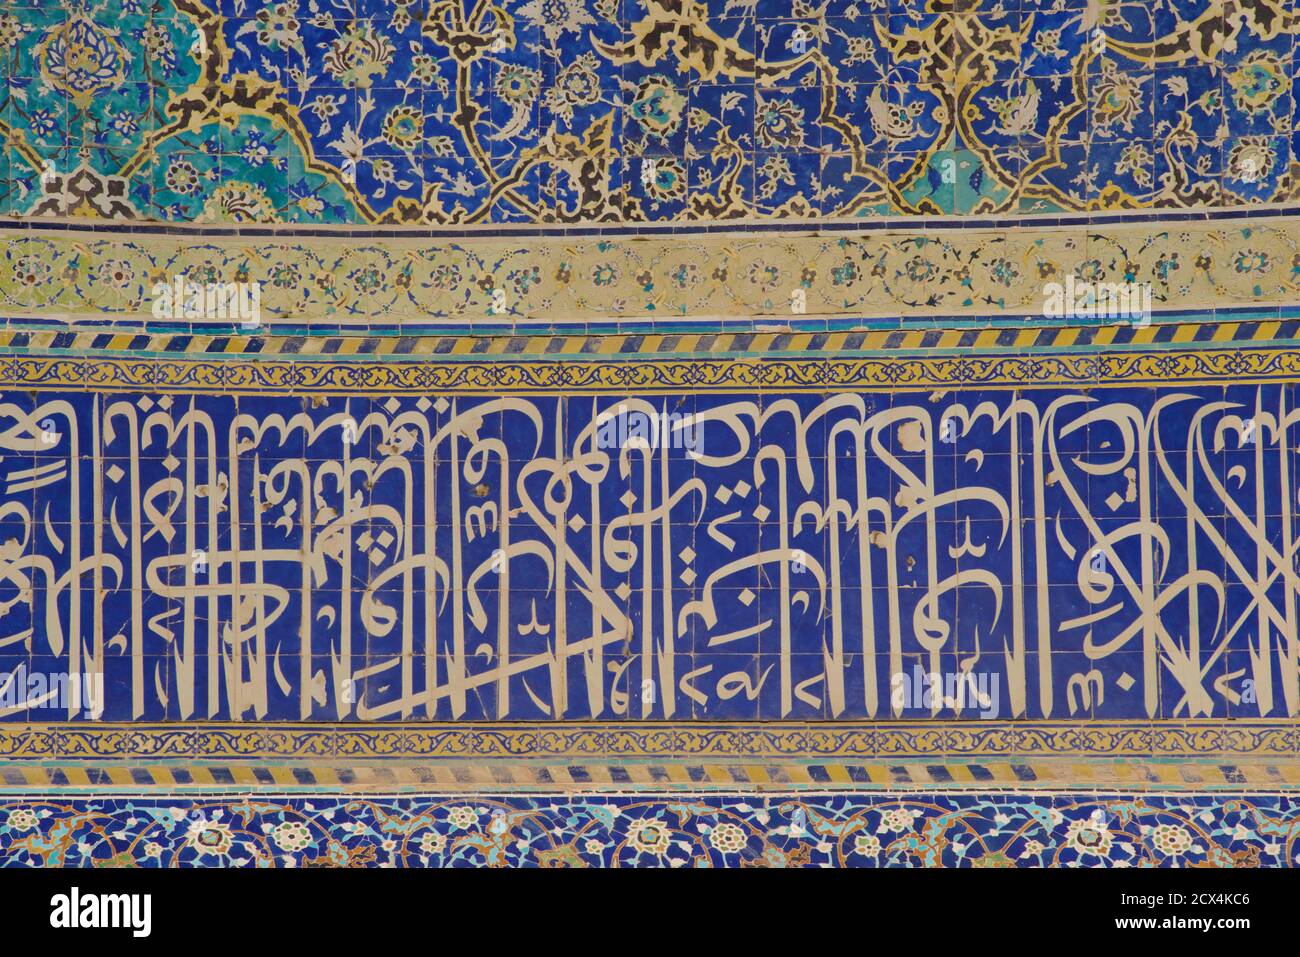 Architectural Detail. Shah Mosque also known as Imam Mosque and Jaame' Abbasi Mosque. Isfahan, Iran. Quranic calligraphy written in Thuluth script Stock Photo